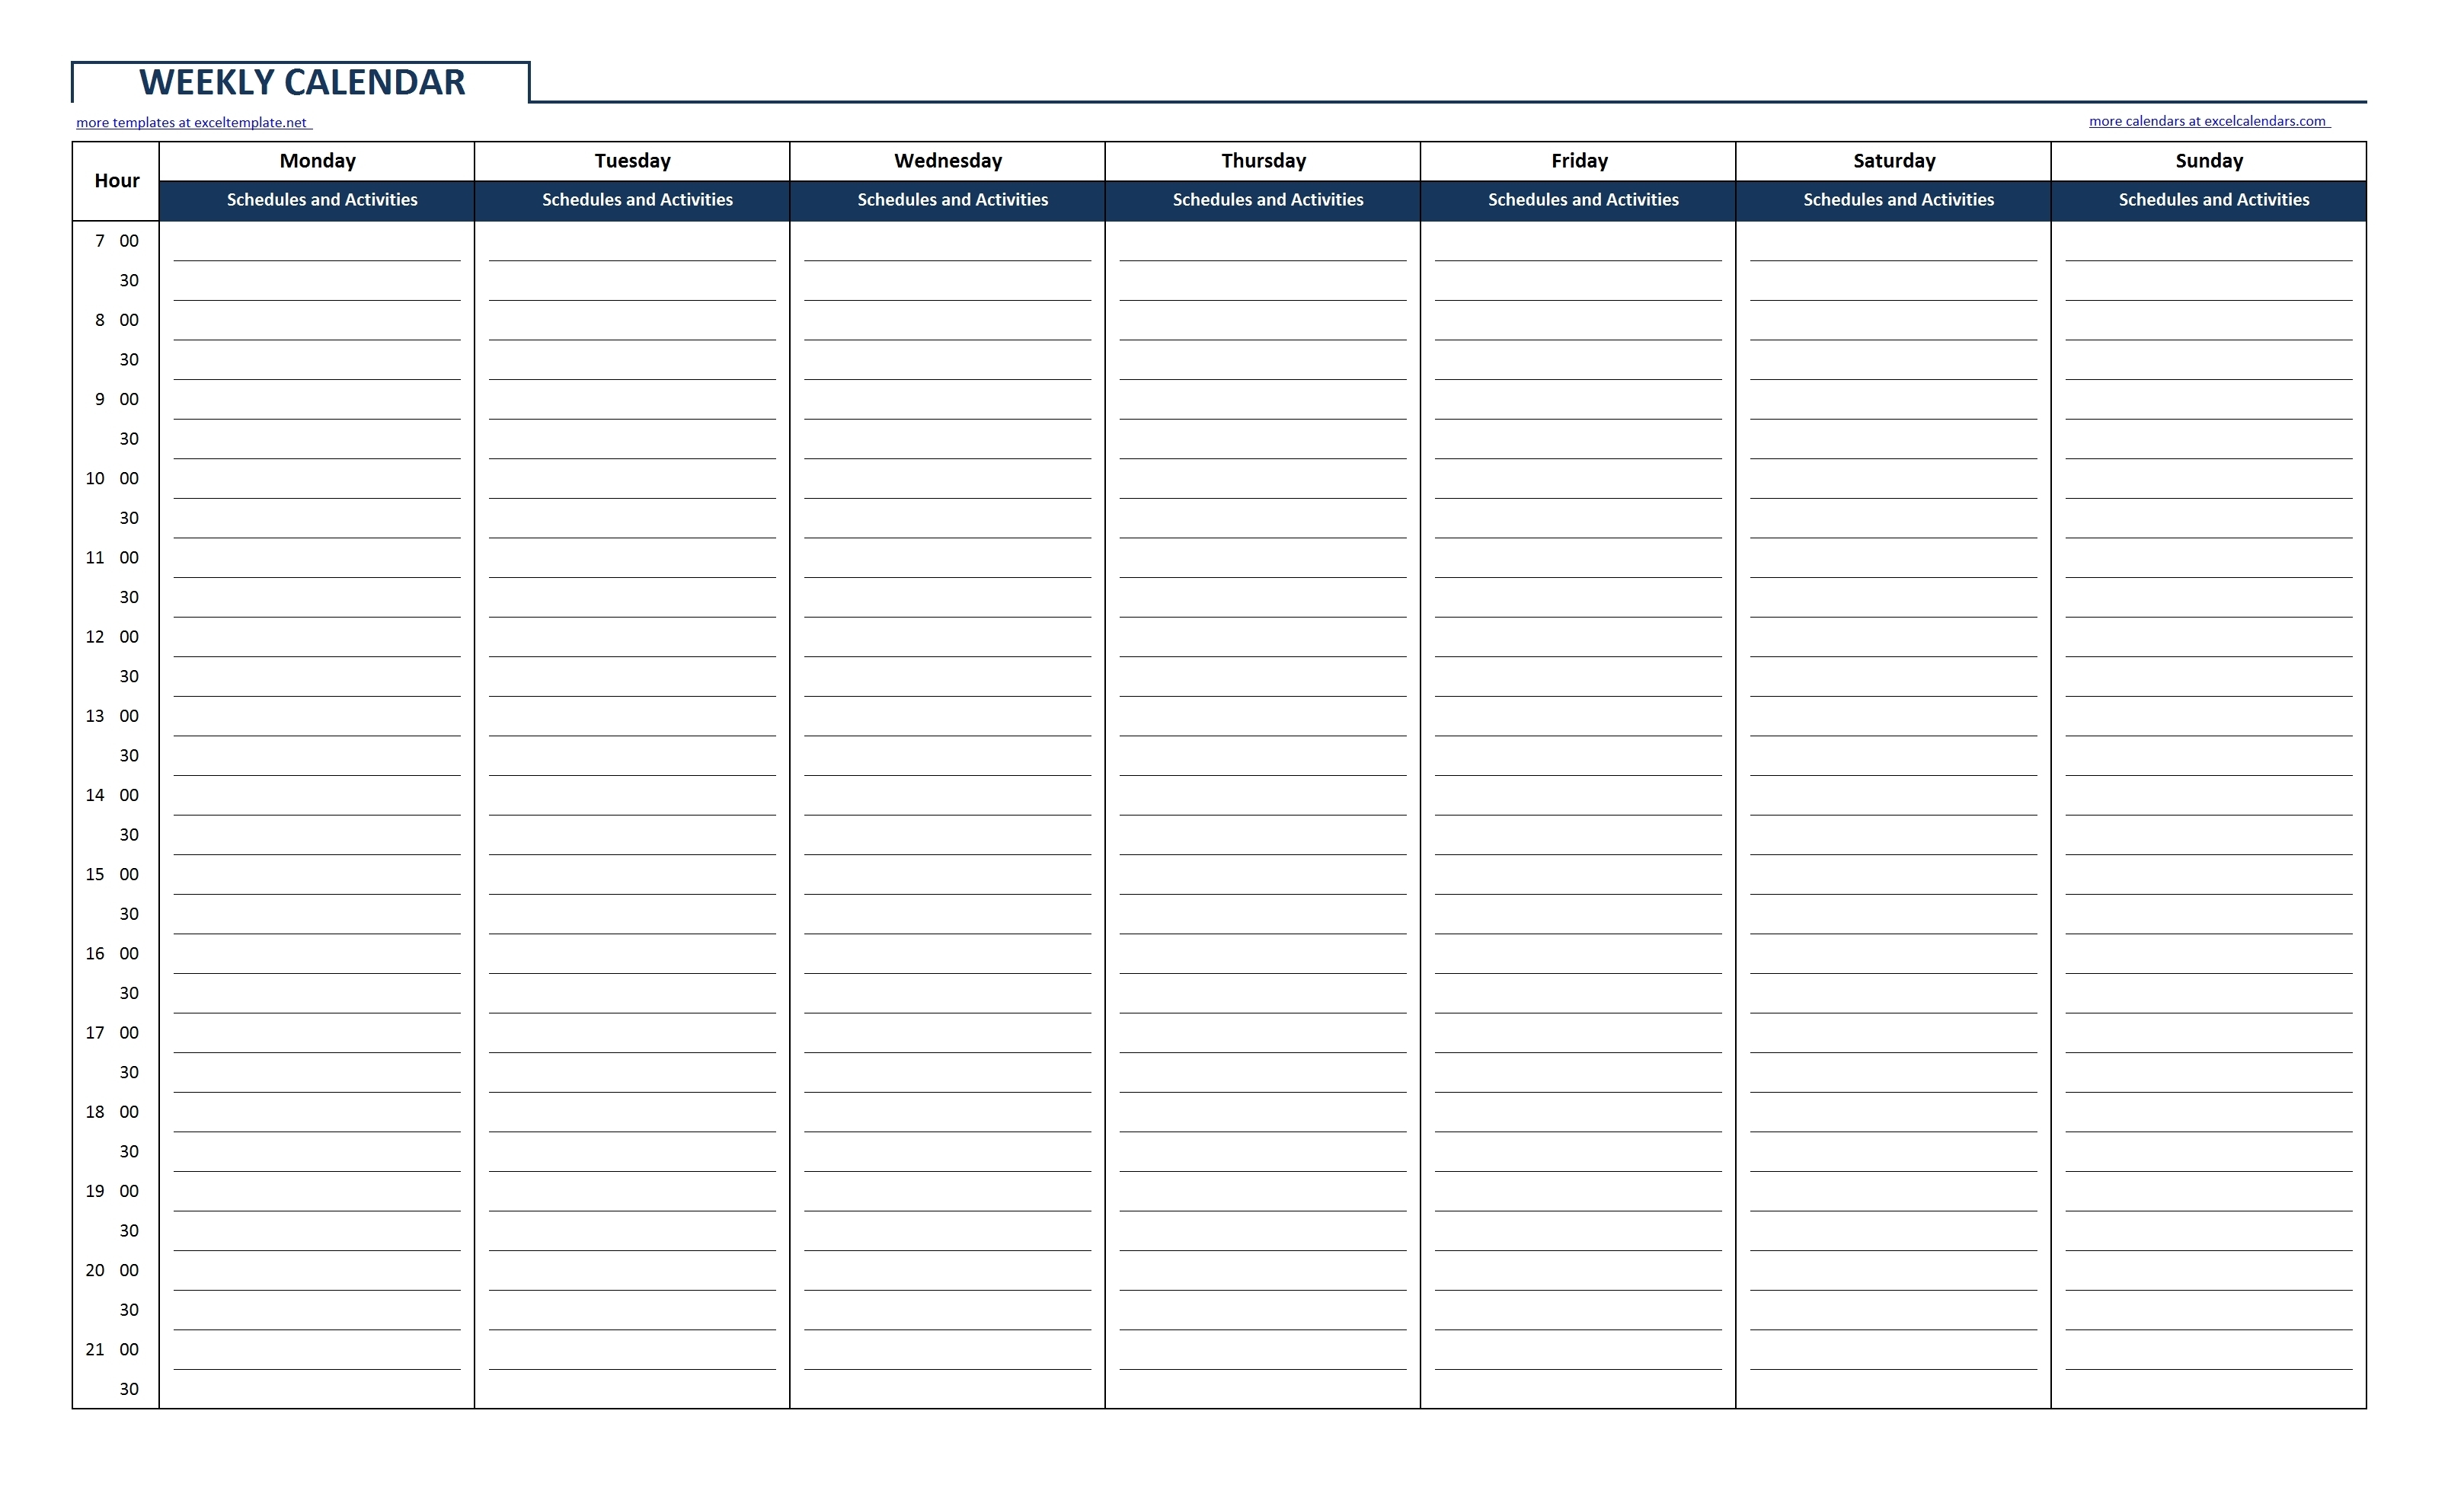 Download Free Printable Weekly Calendar With Time Slots for Time Slot Template Schedule Excel